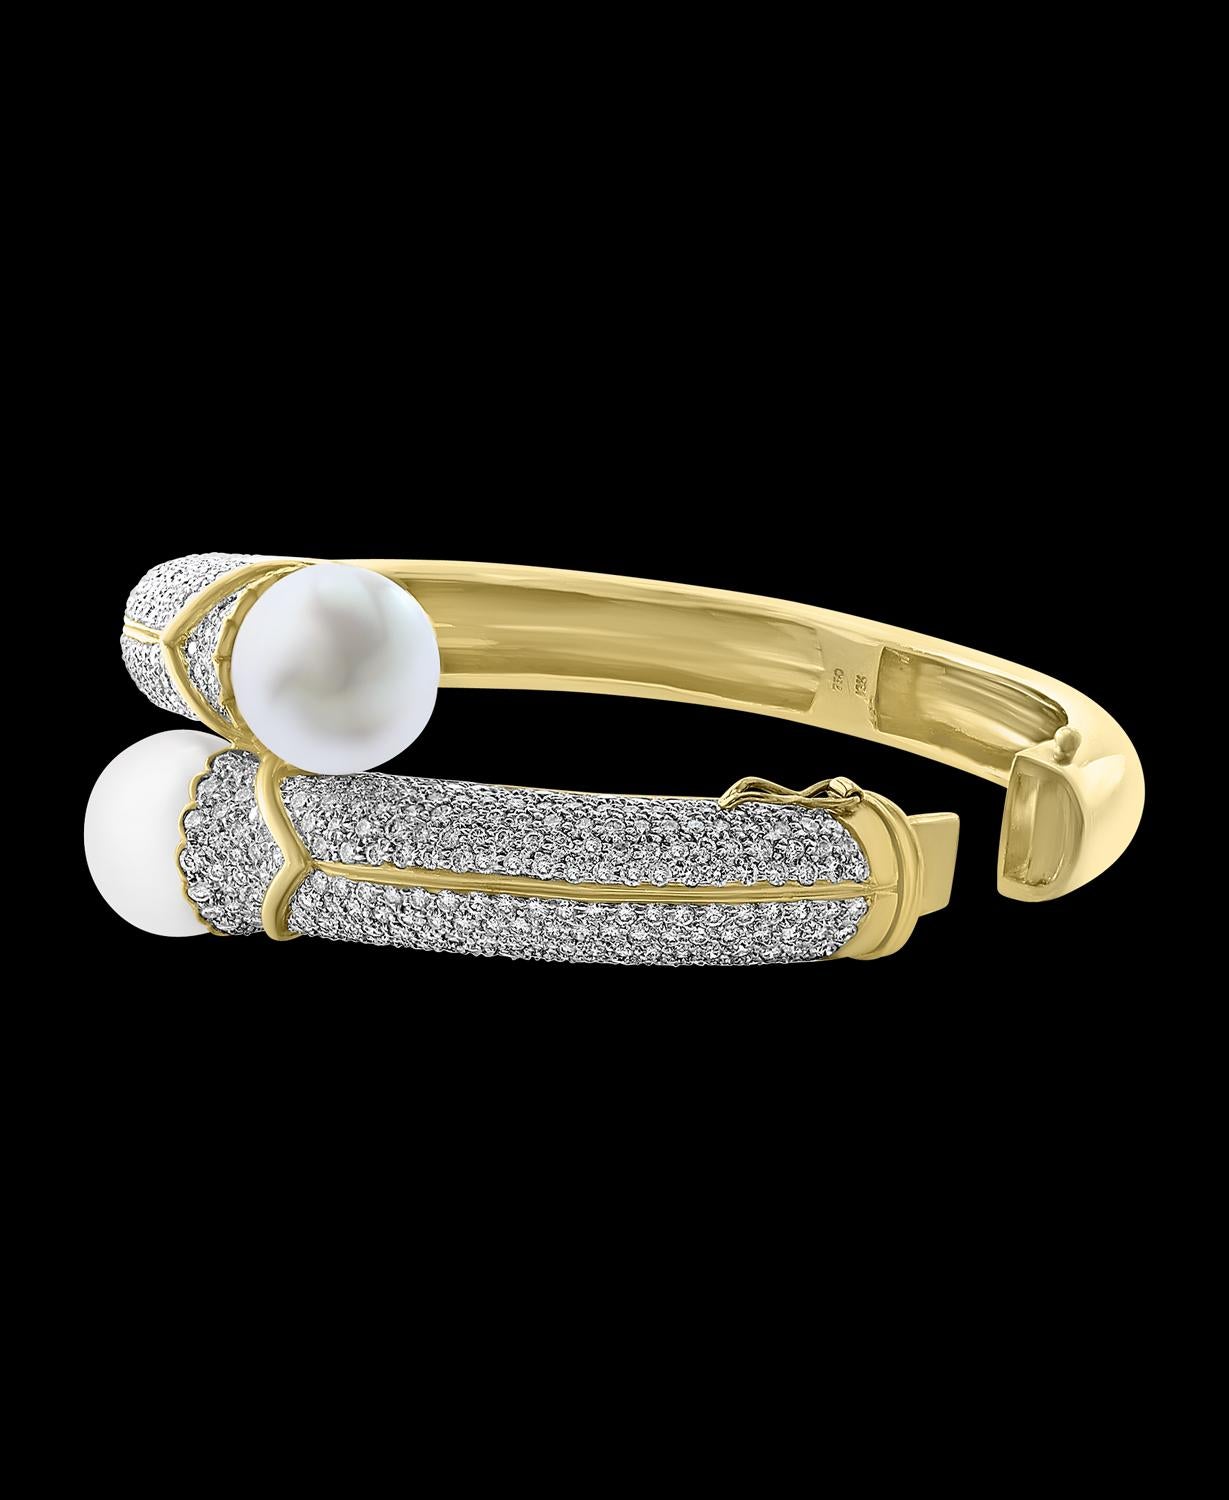 Two South Sea Pearl  Each 13.5 mm And  8 Ct Diamond  Bangle in 18 Karat Yellow Gold Estate
Diamonds : Approximately 8 Carat
South sea Pearlm : Each Pearl high Luster , White , No Blemishes , 13.5mm in size 
18k Yellow  gold  : 66 Grams
open from